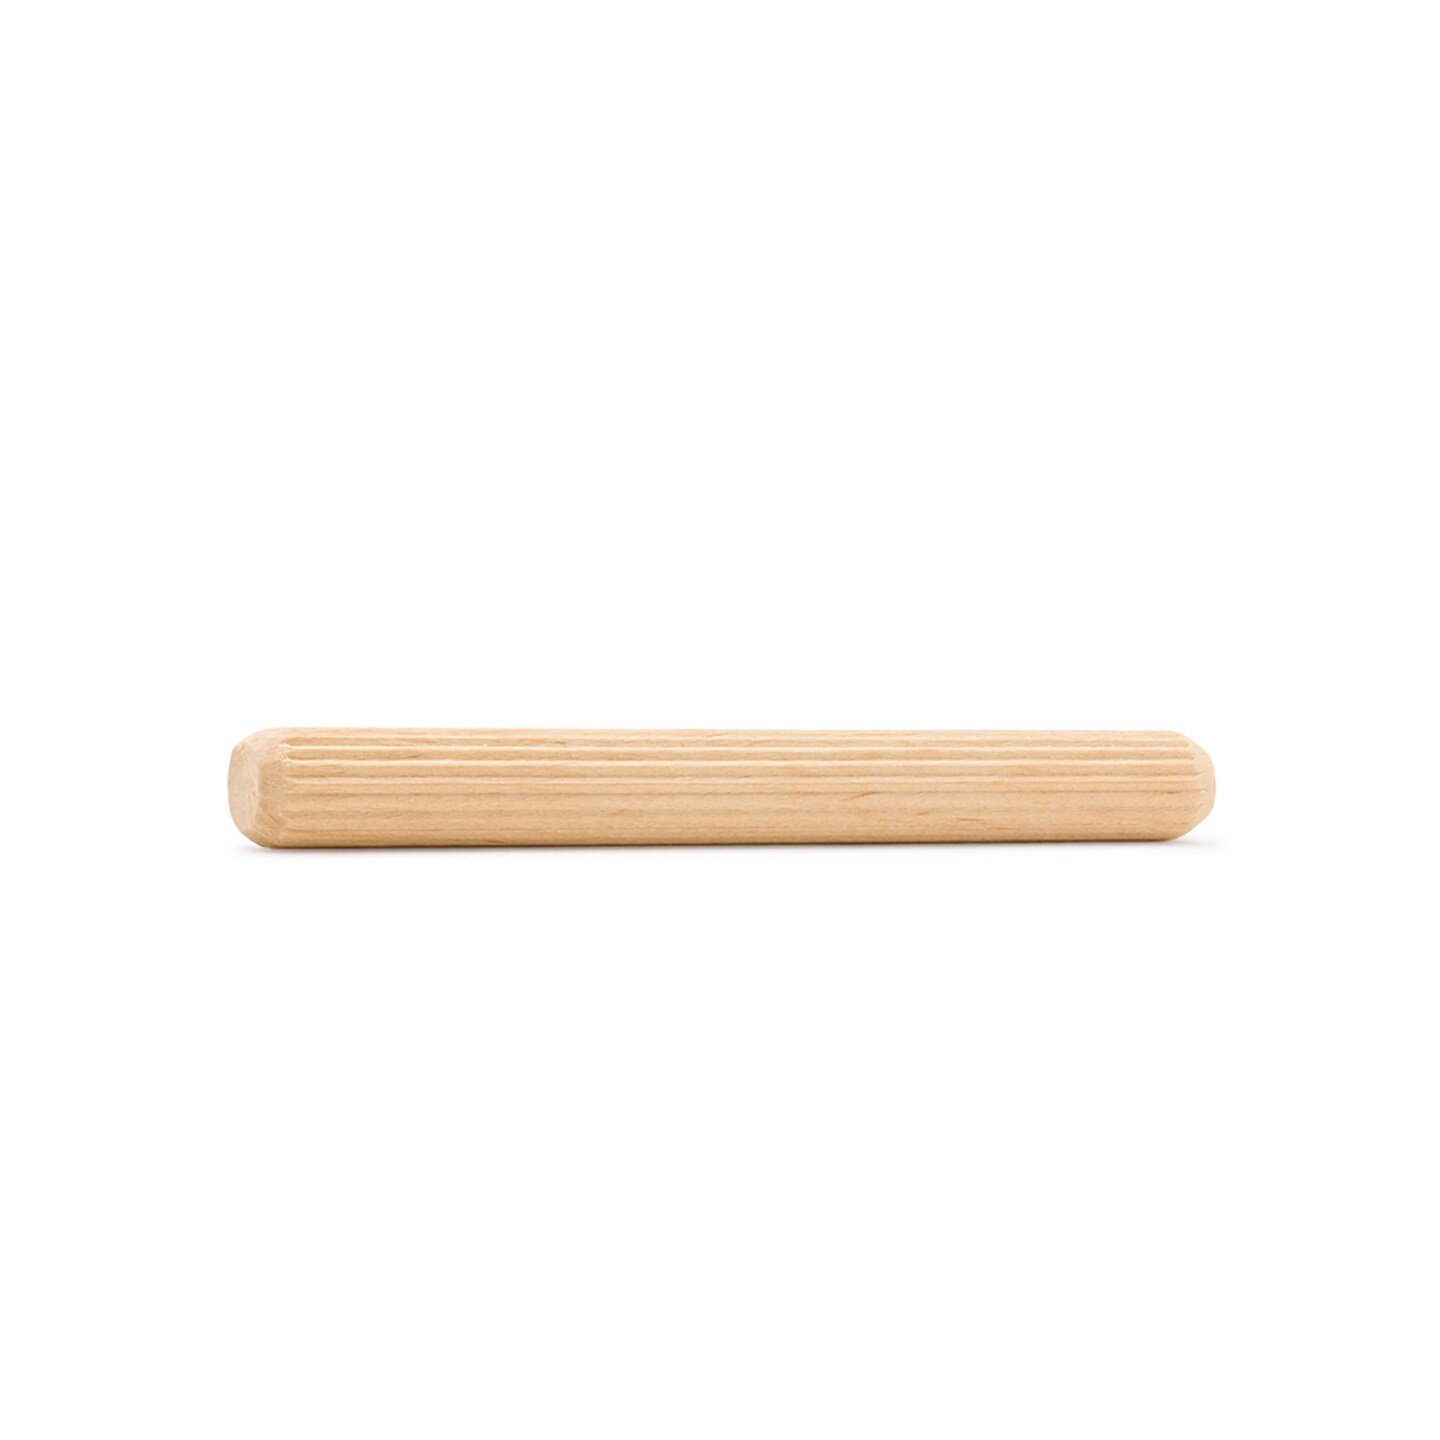 Wood Dowel Pins, Wood Dowels Assorted Sizes, Fluted Wooden Dowel Pins For  Furniture Crafts Woodwork